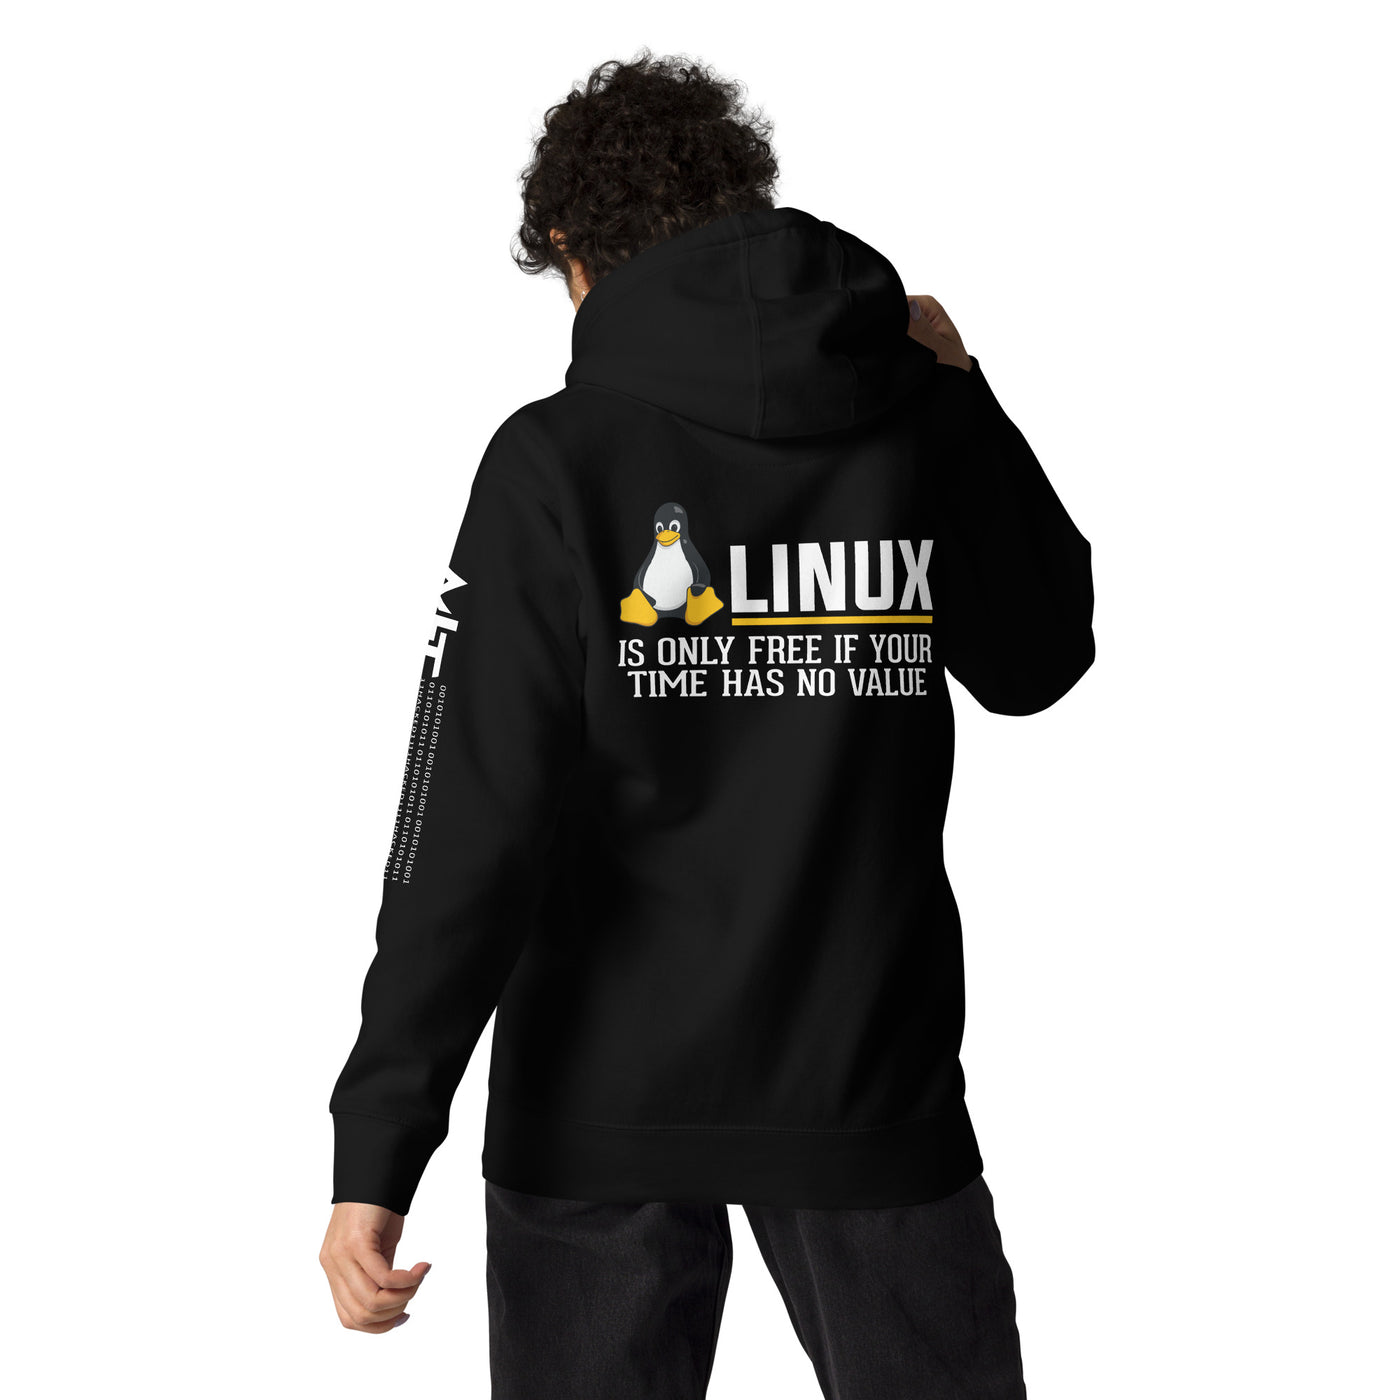 Linux is free only when your time has no value Unisex Hoodie ( Back Print )